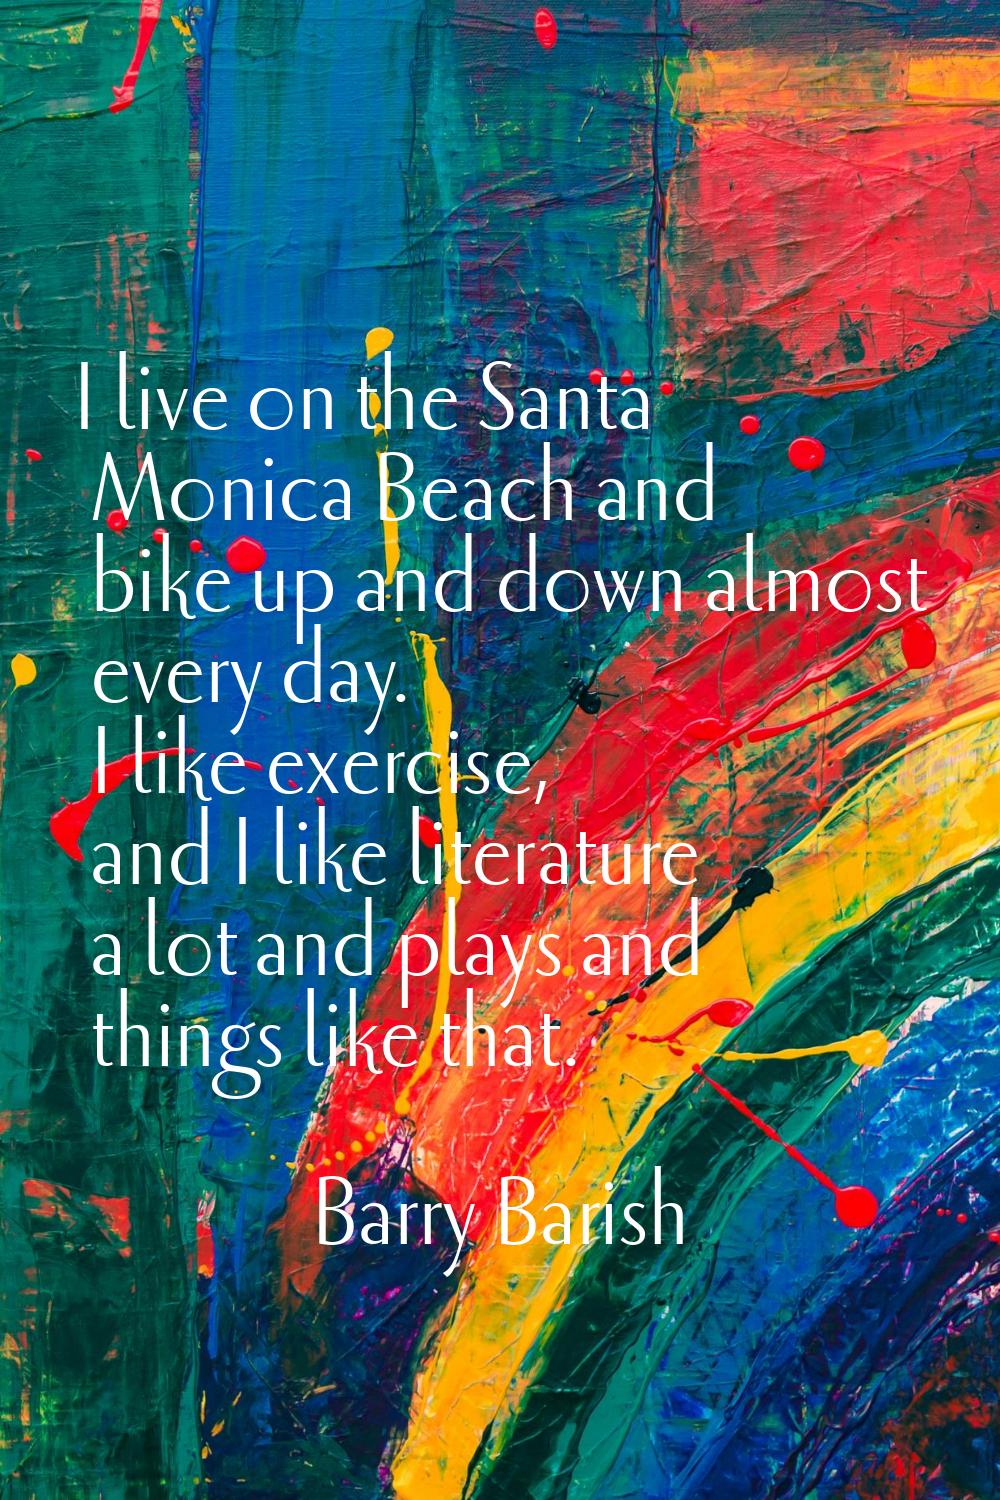 I live on the Santa Monica Beach and bike up and down almost every day. I like exercise, and I like